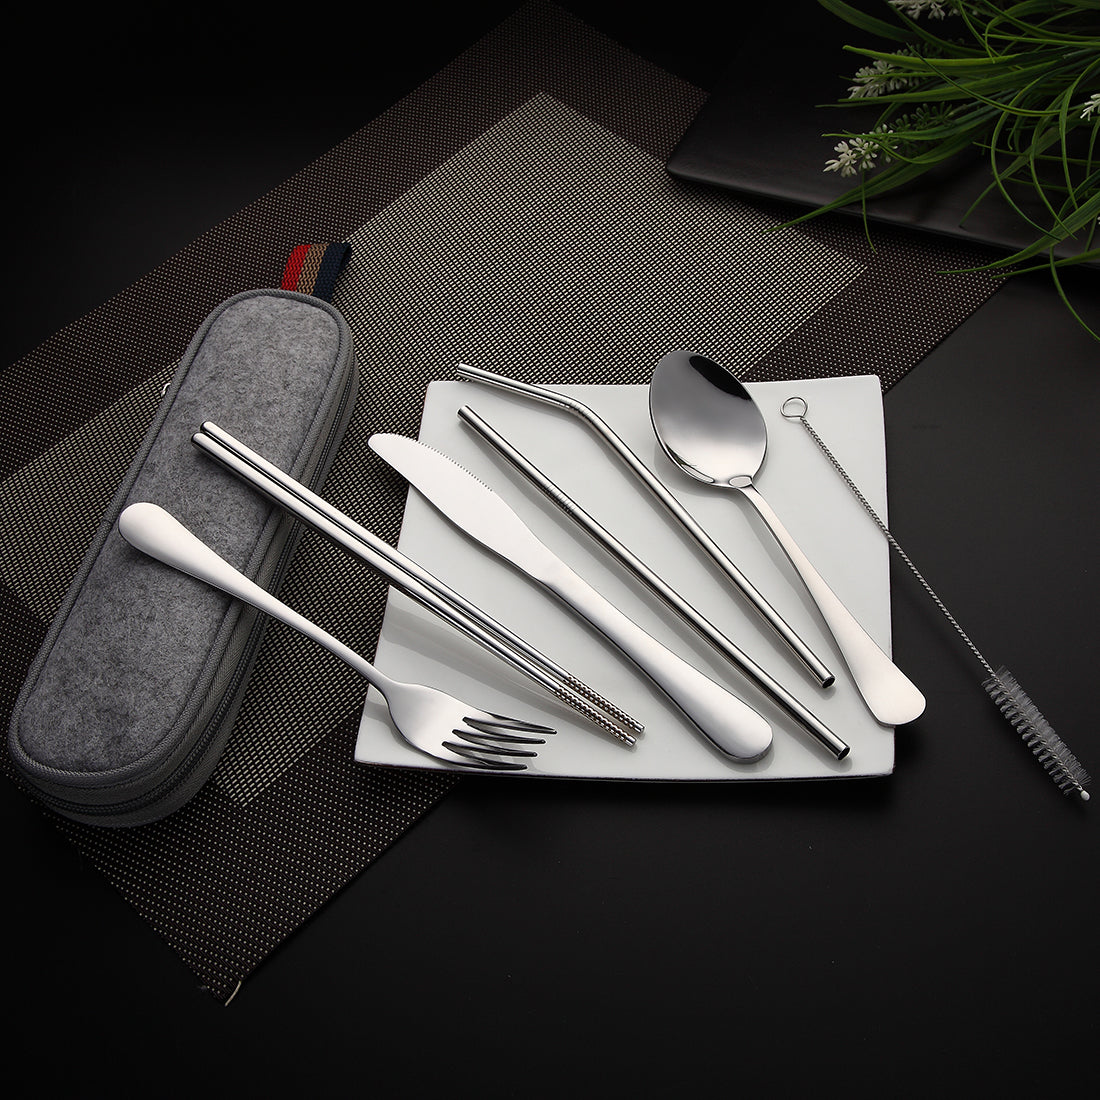 Stainless Steel Travel Cutlery Set With Knife, Fork, Spoon, And